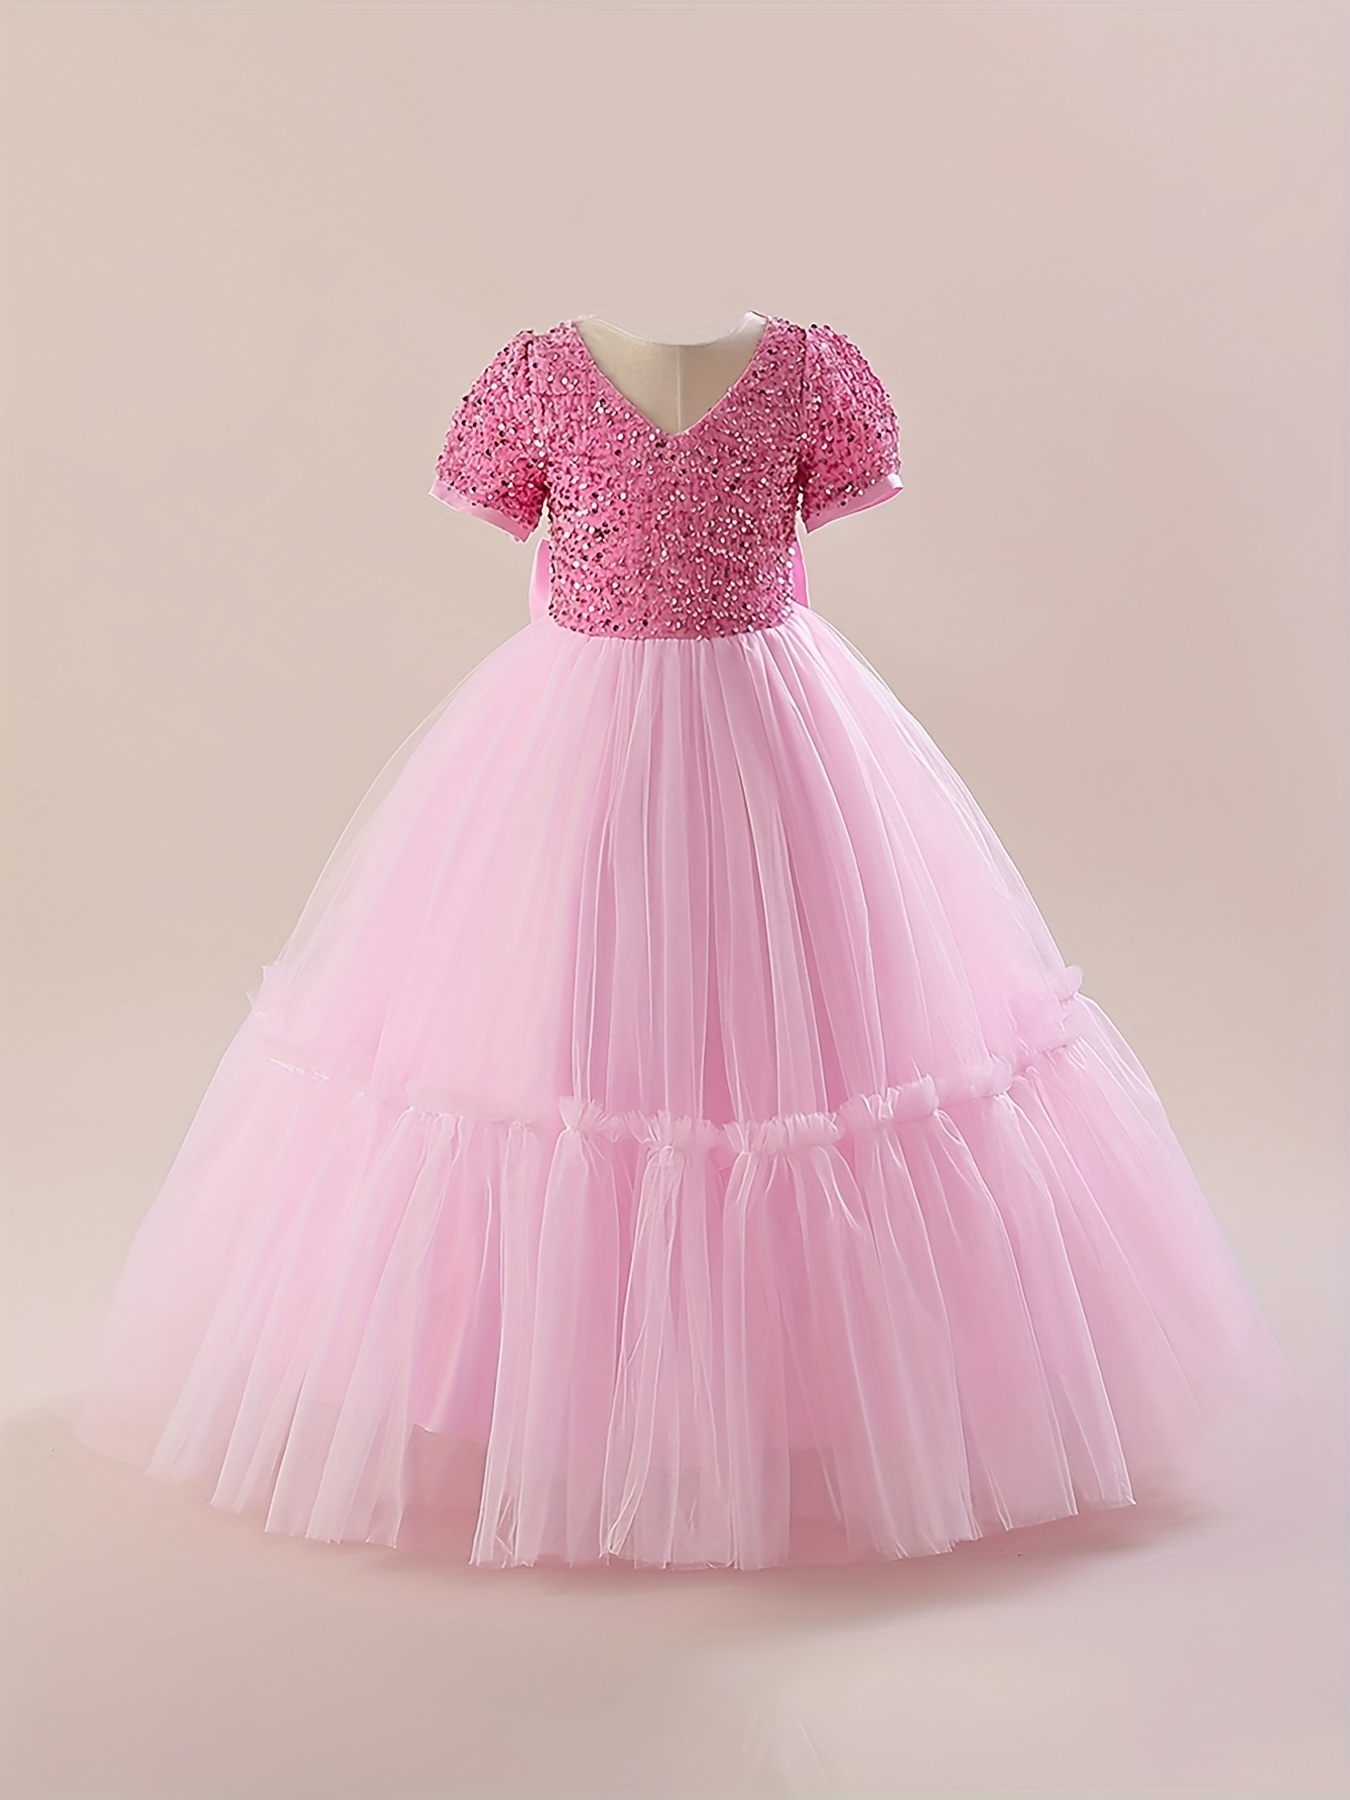 New Arrival Pink O Neck Children Princess Dress Sparkly Sequined